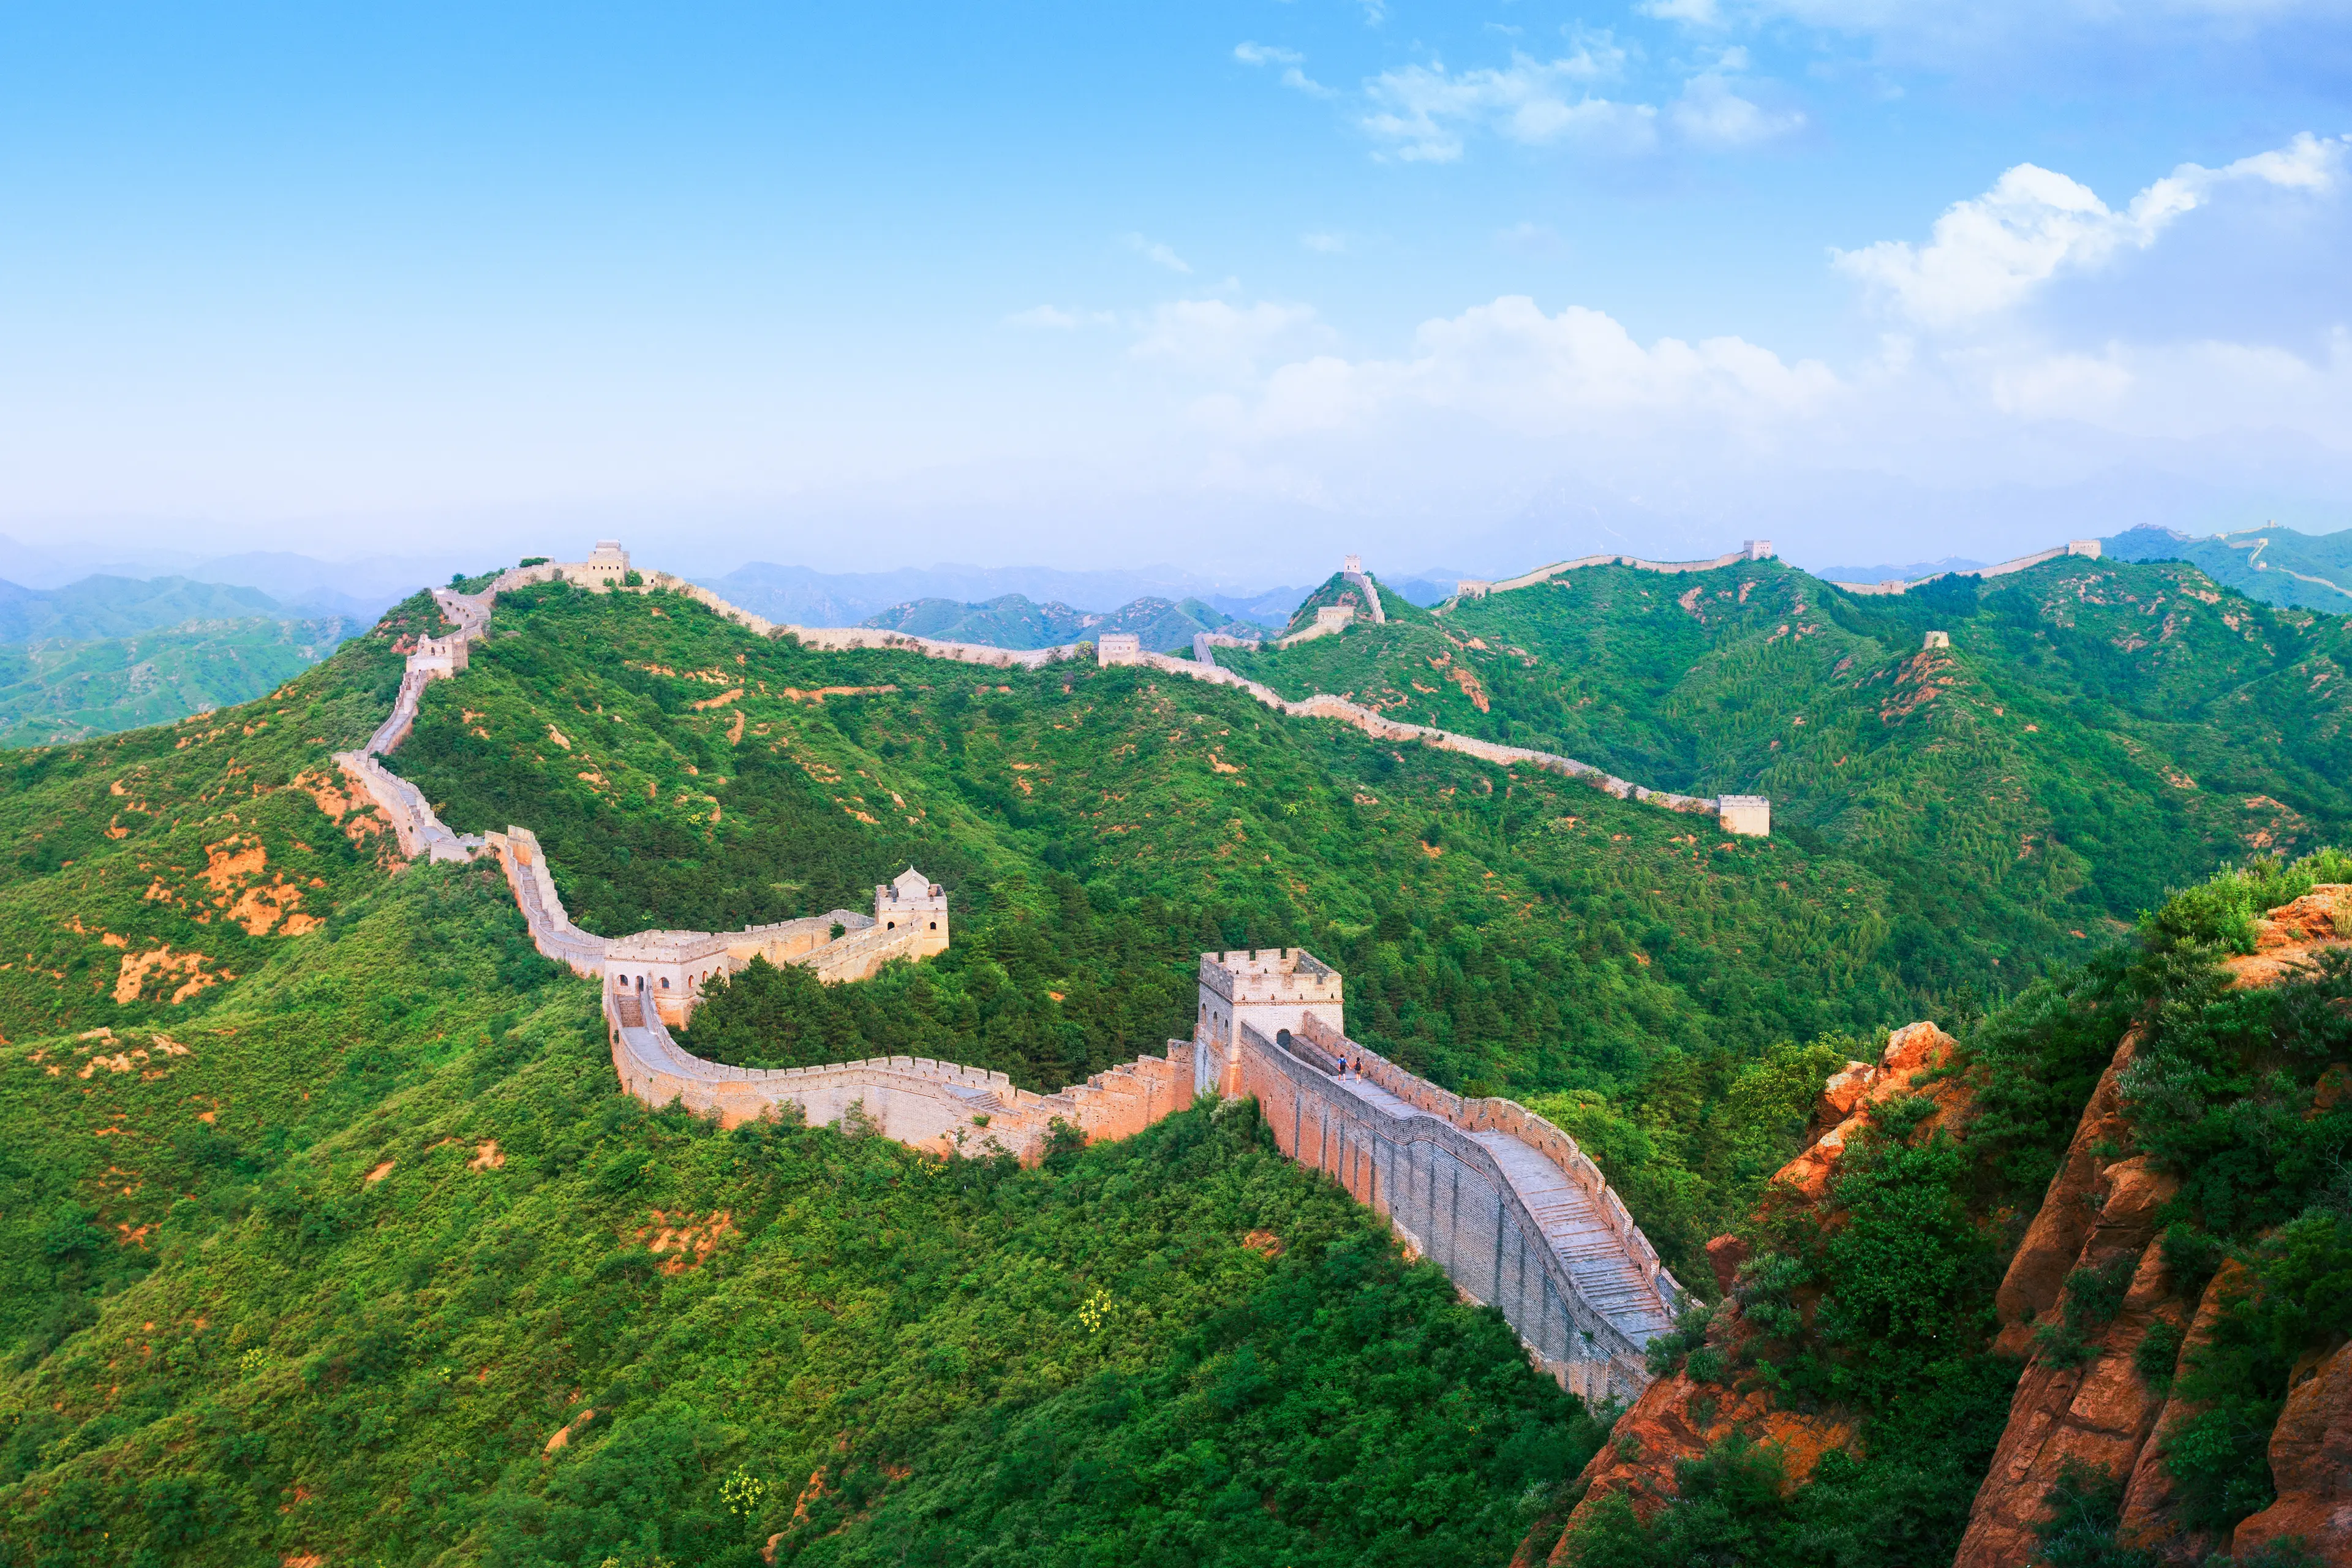 1-Day Great Wall of China Sightseeing Adventure with Friends